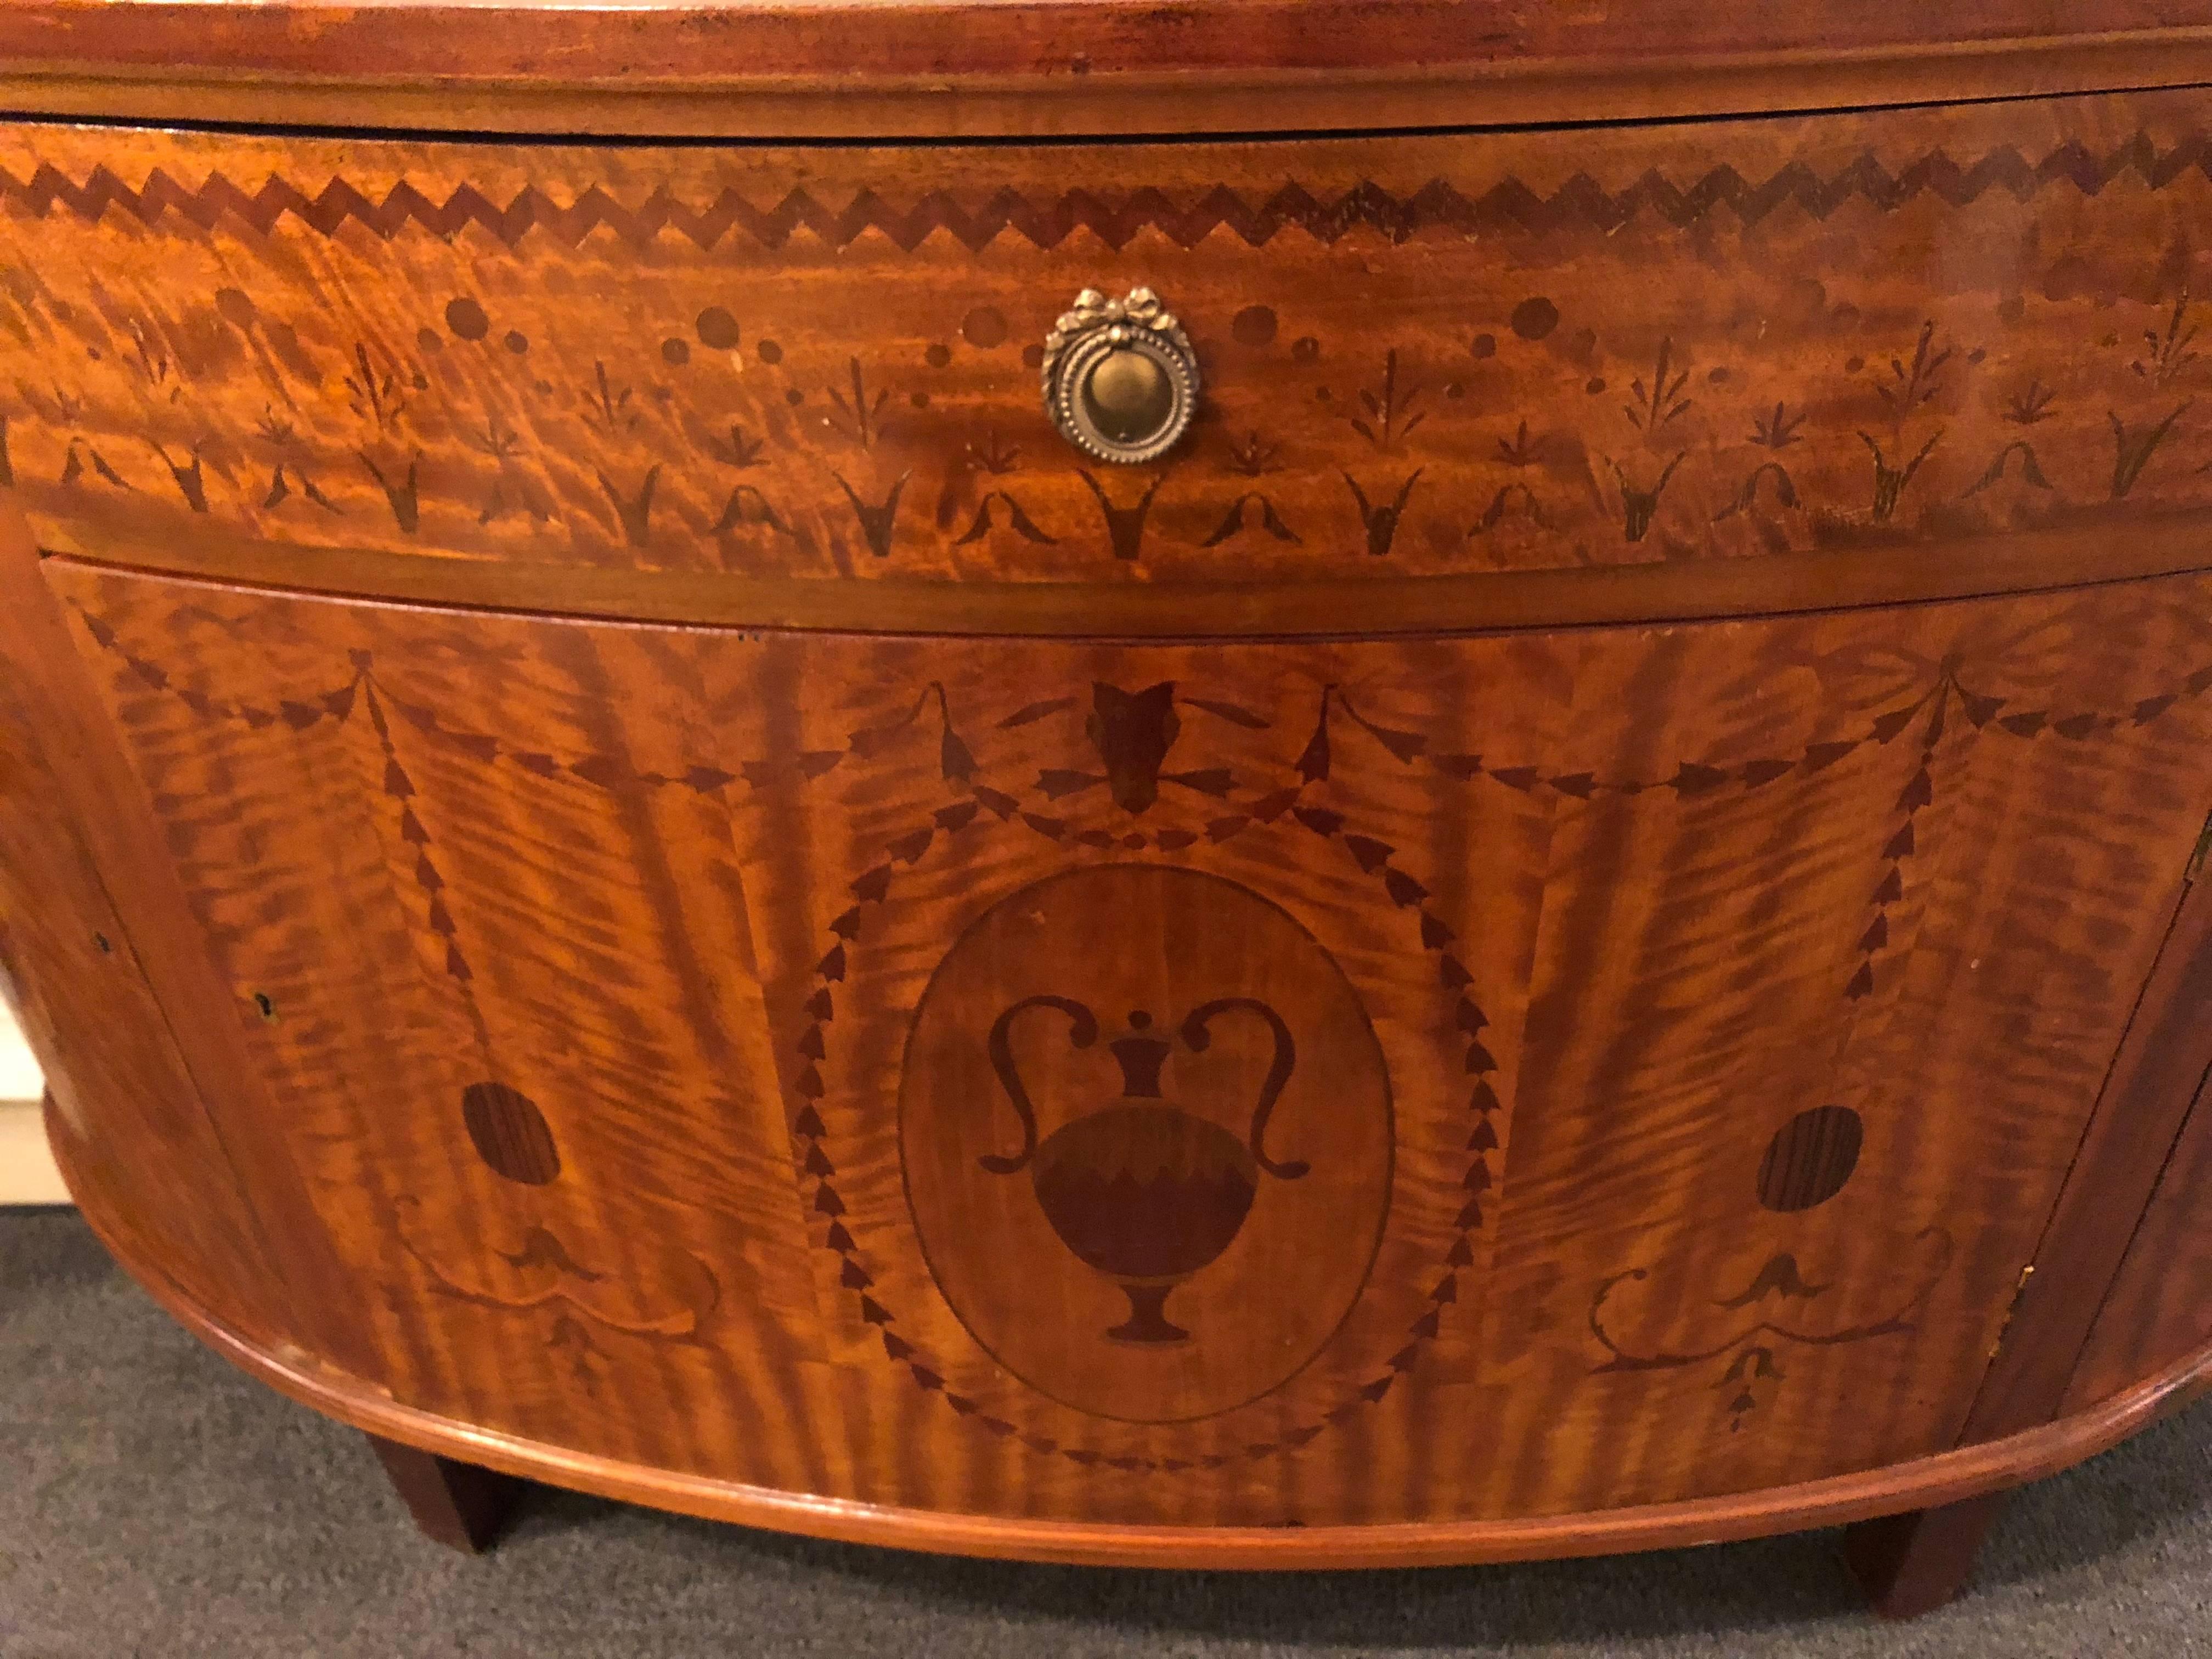 Pair of Palatial Adams style demilune consoles cabinets or commodes. Each with a fine inlaid demilune top above a large centre door leading to a shelved interior flanked by inlaid demilune sides having doors leading to shelved interiors as well.